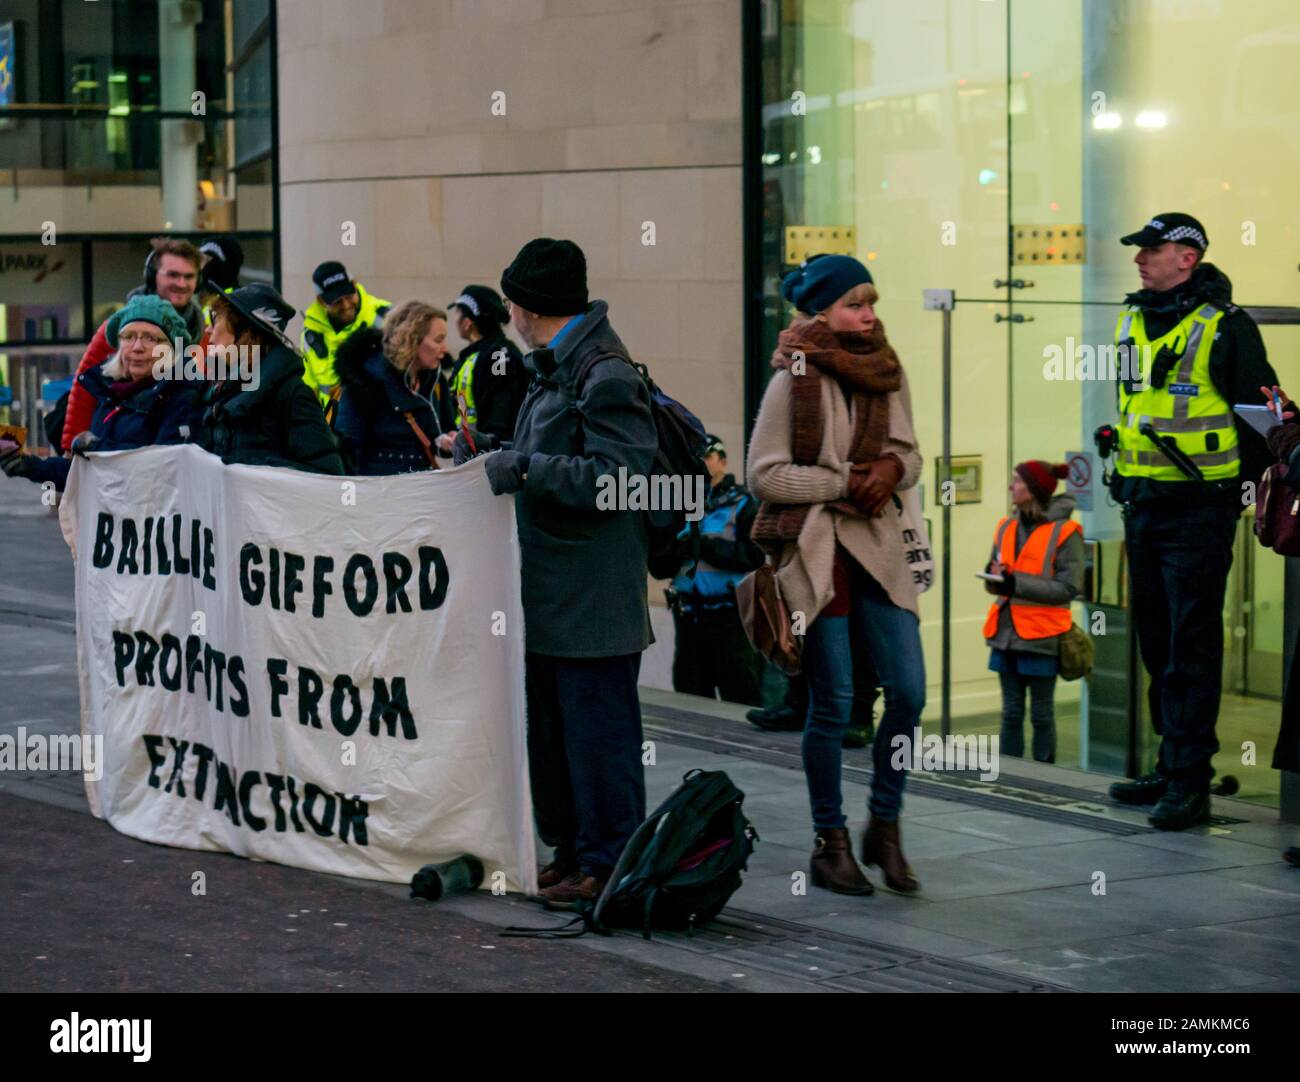 Leith Street, Edinburgh, Scotland, United Kingdom, 14 January 2020. Extinction Rebellion: part of the campaign’s week long action against companies in the fossil fuels industry. The activists target financial company Baillie Gifford from before dawn, who manage the MSP pension fund which includes shares in the oil company Shell. There is a large police presence to keep the situation in order Stock Photo